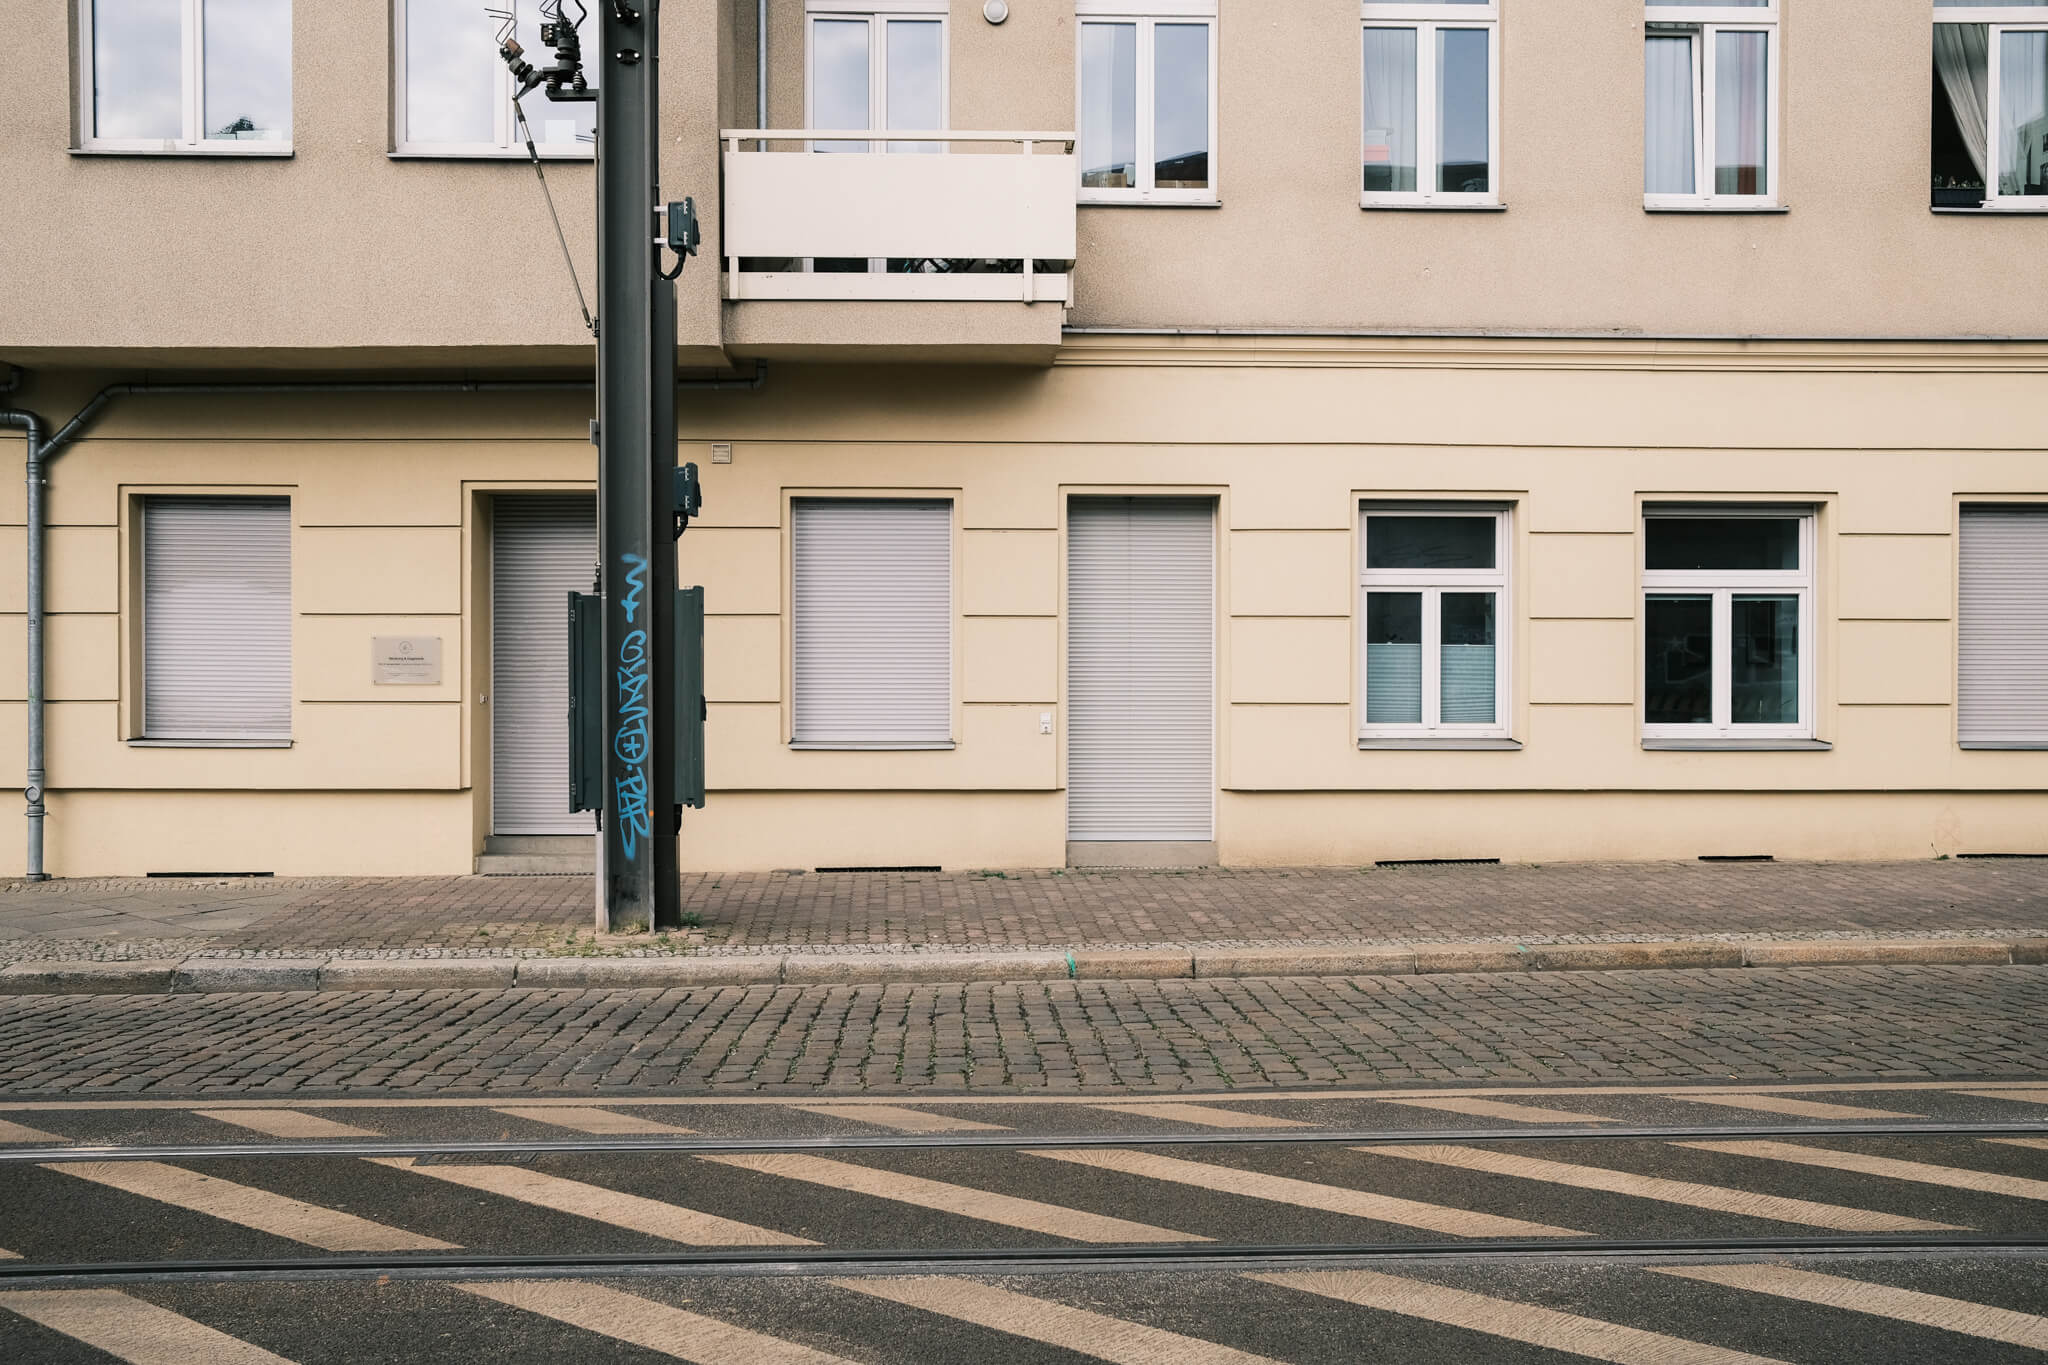 A pleasing monochrome color palette on the streets of Berlin